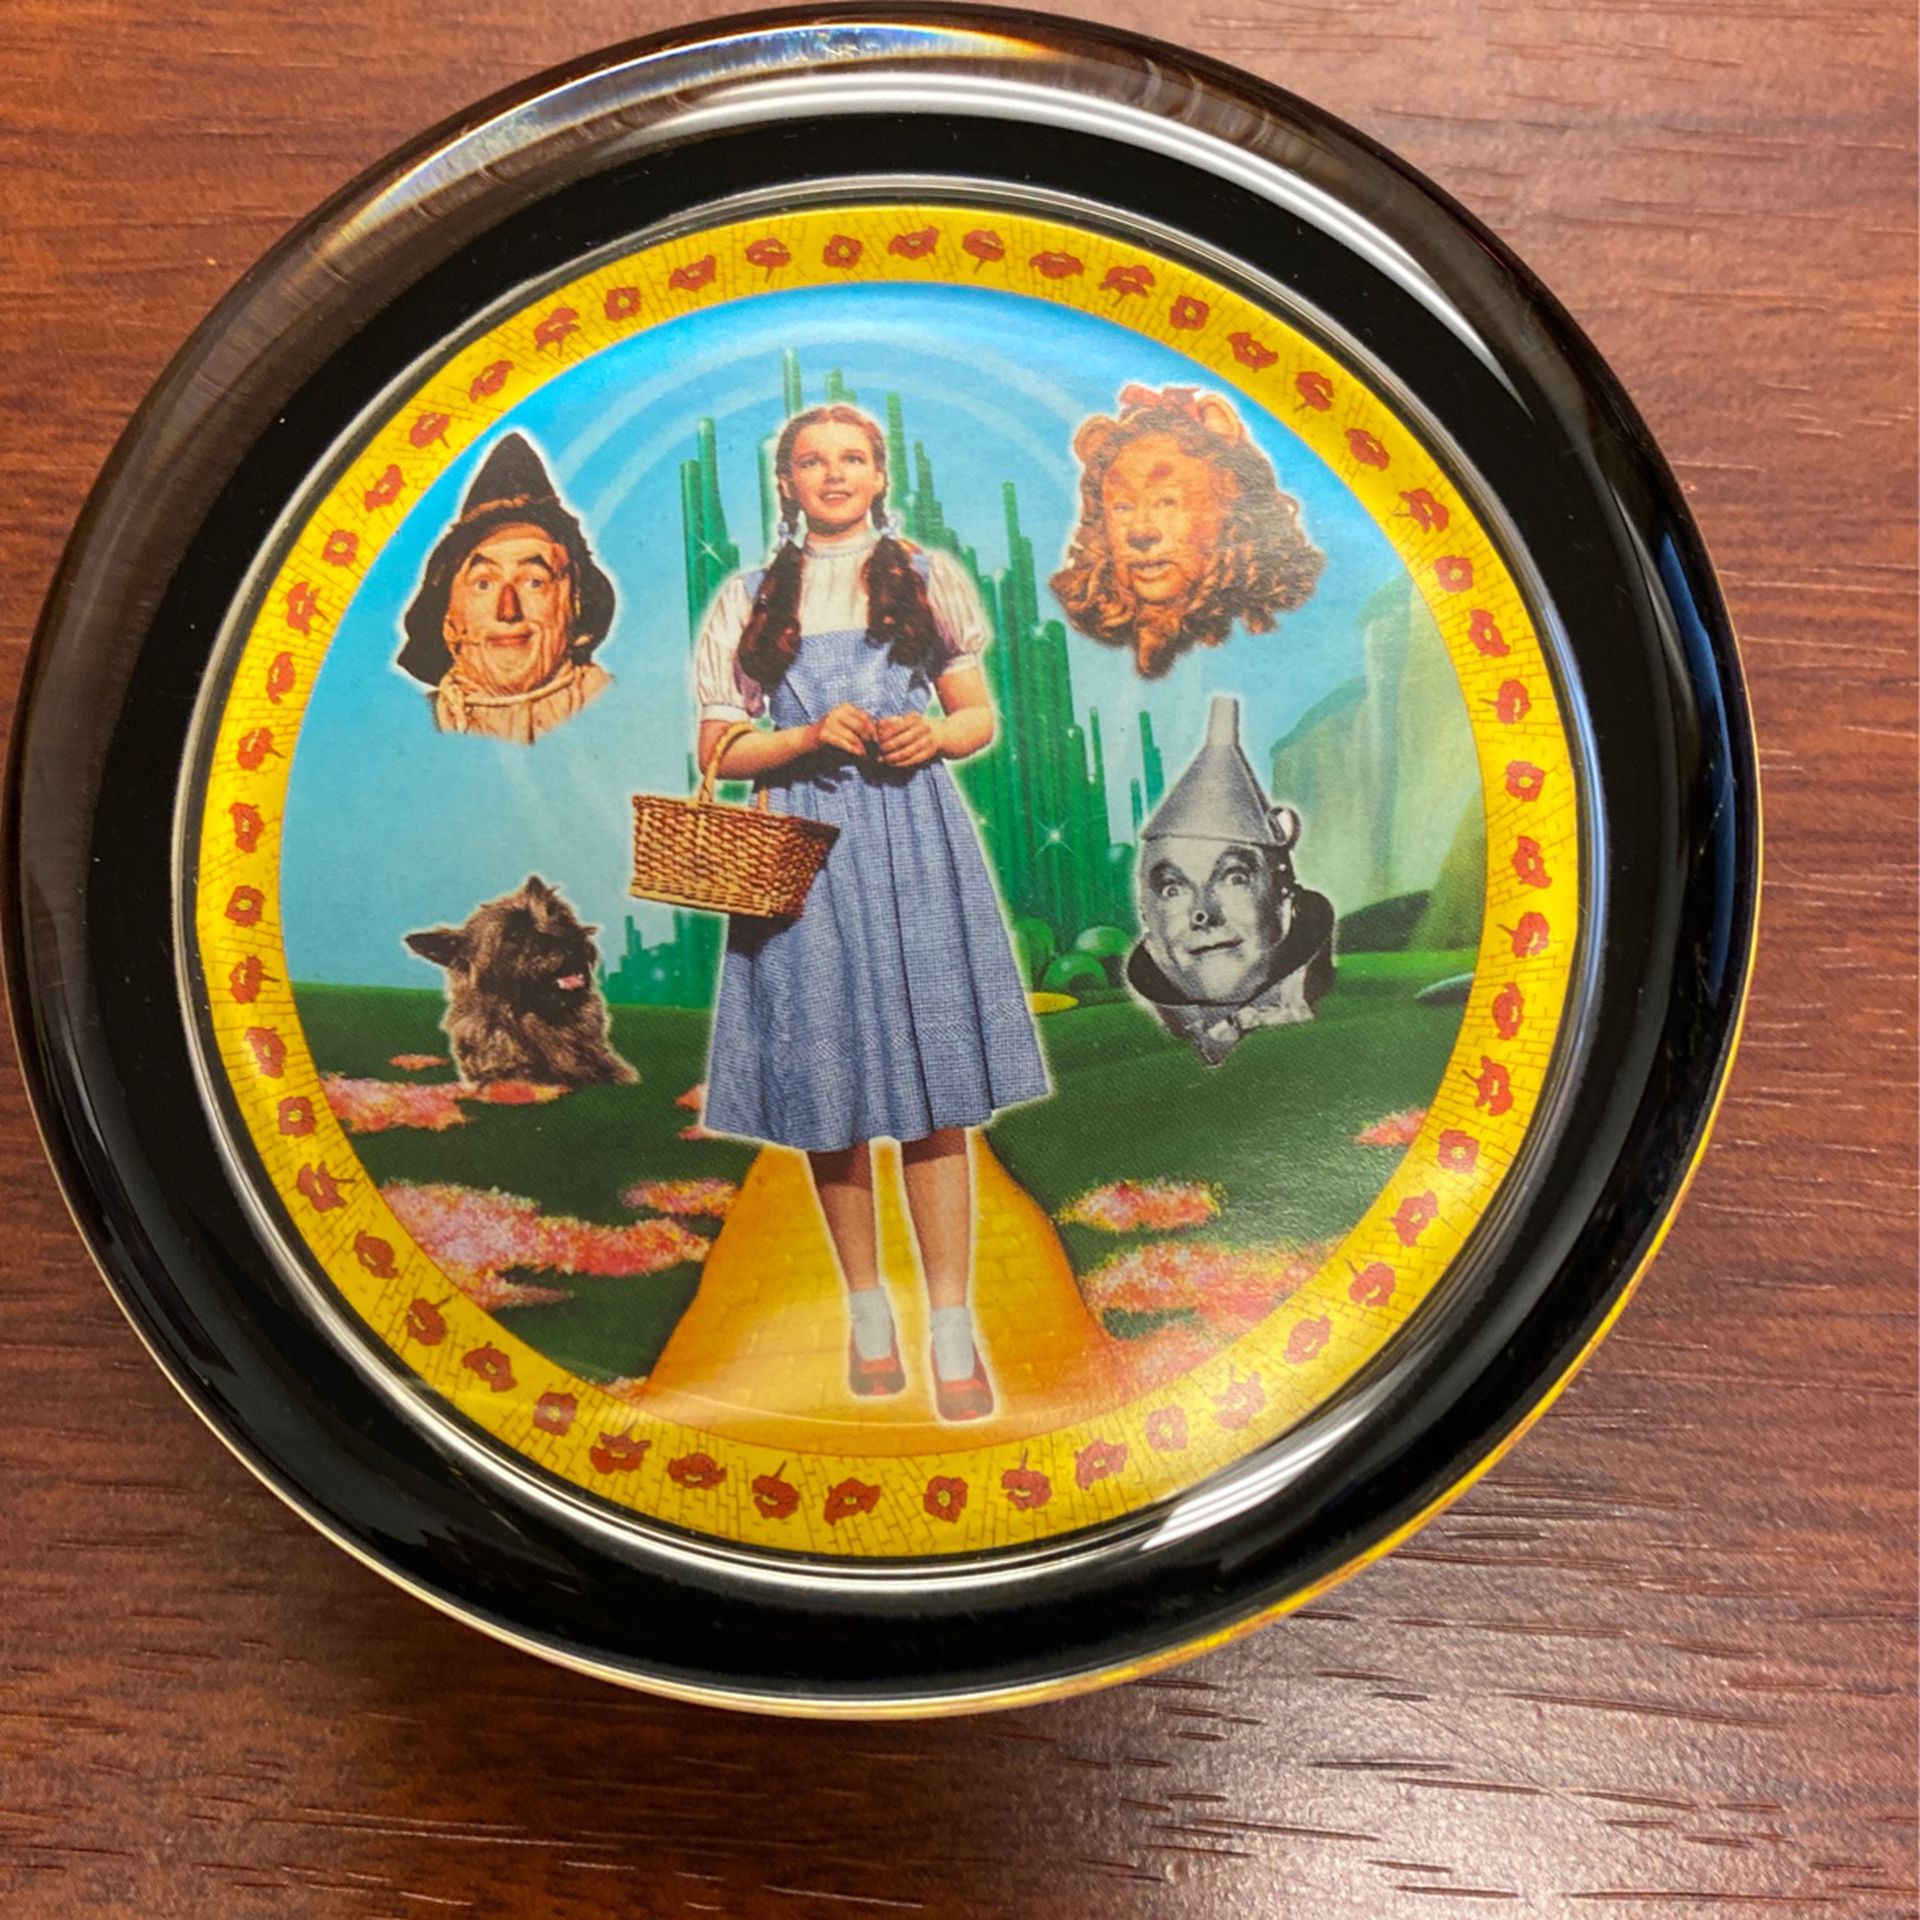 Rare Wizard of Oz paperweight